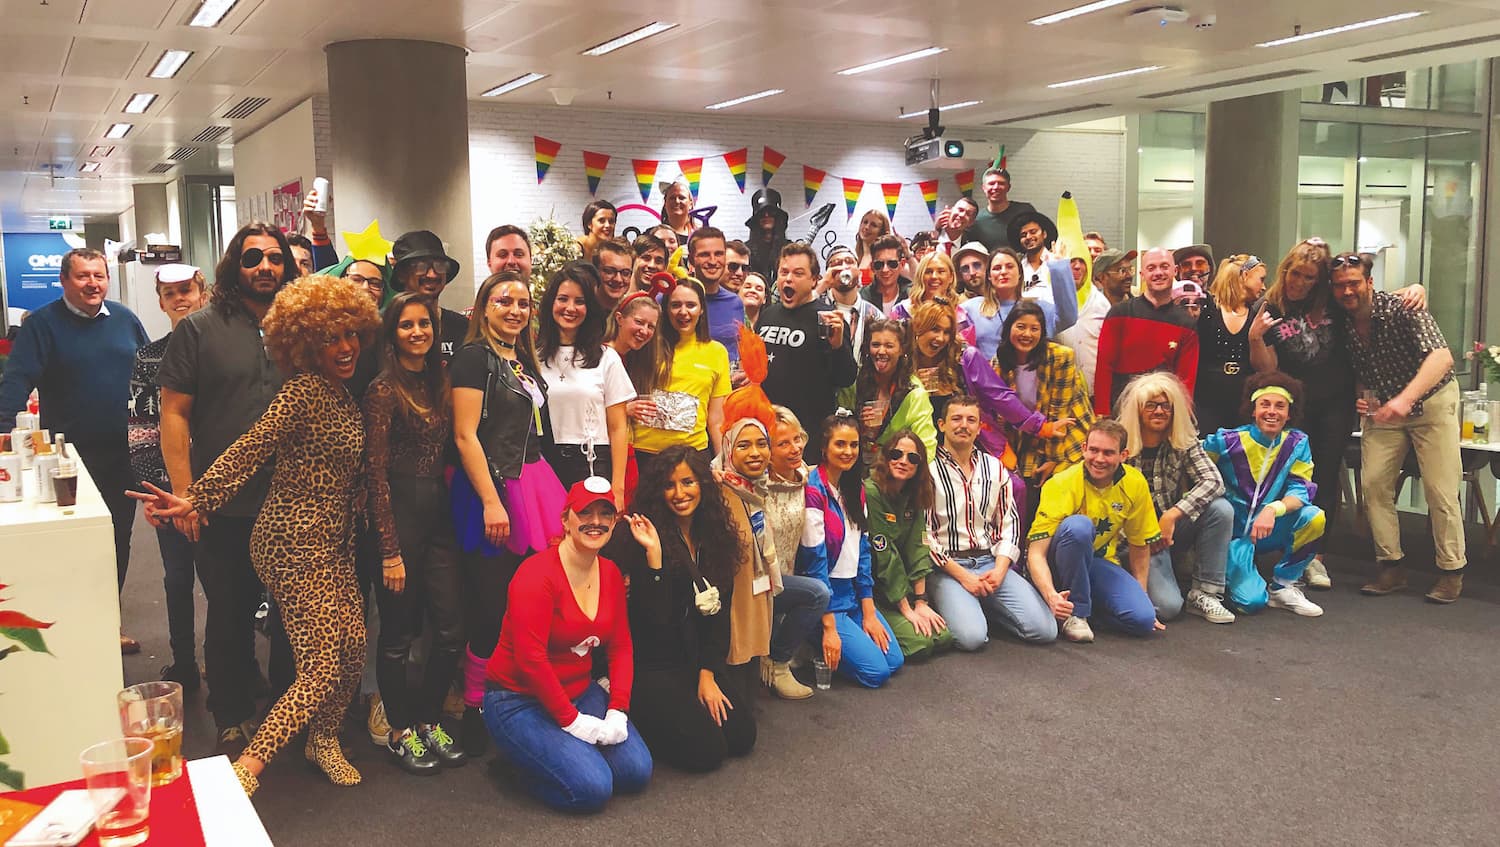 A group shot of agency staff in fancy dress at their Christmas party